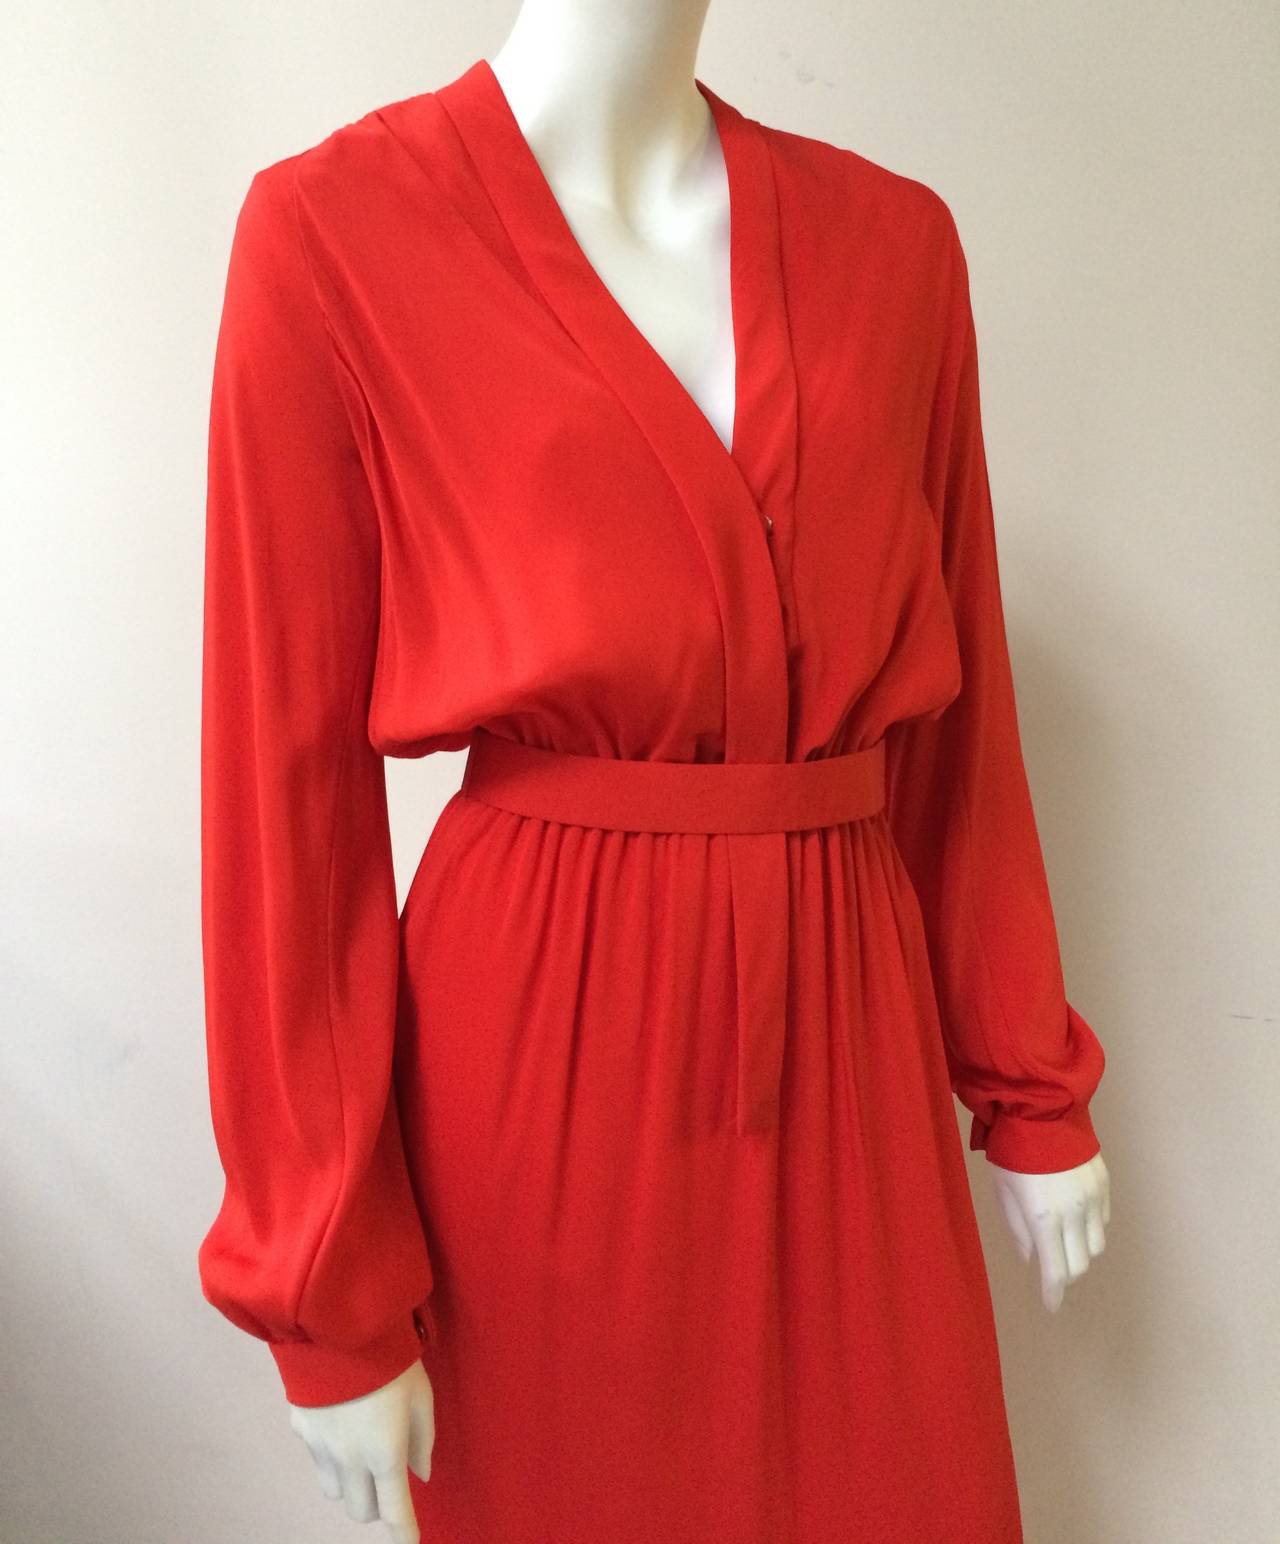 Geoffrey Beene for Beene Bazaar 1960s red plunging neckline, elastic waistband with pockets & original belt. This maxi dress does not have a fabric content label but feels like thick silk.  The mannequin is a size 4 so this dress is going to fit 4-6